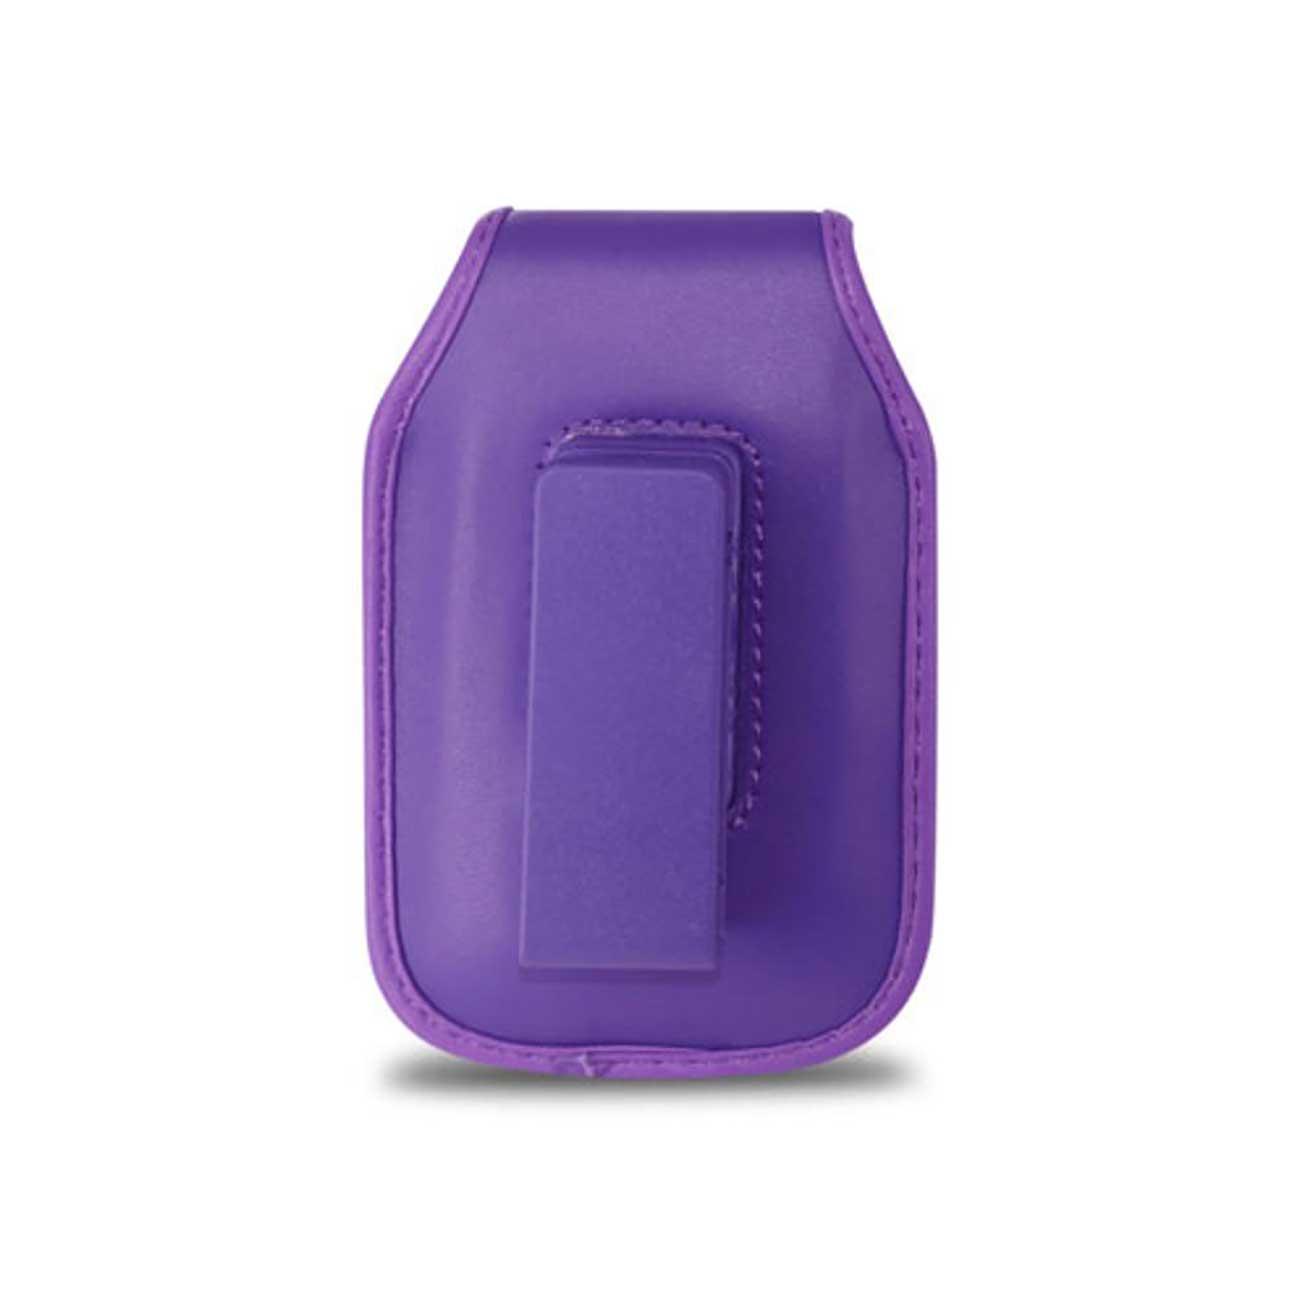 Pouch/Phone Holster Vertical Vp11A Motolola V3 4X0.5X2.1 Inches Purple Color